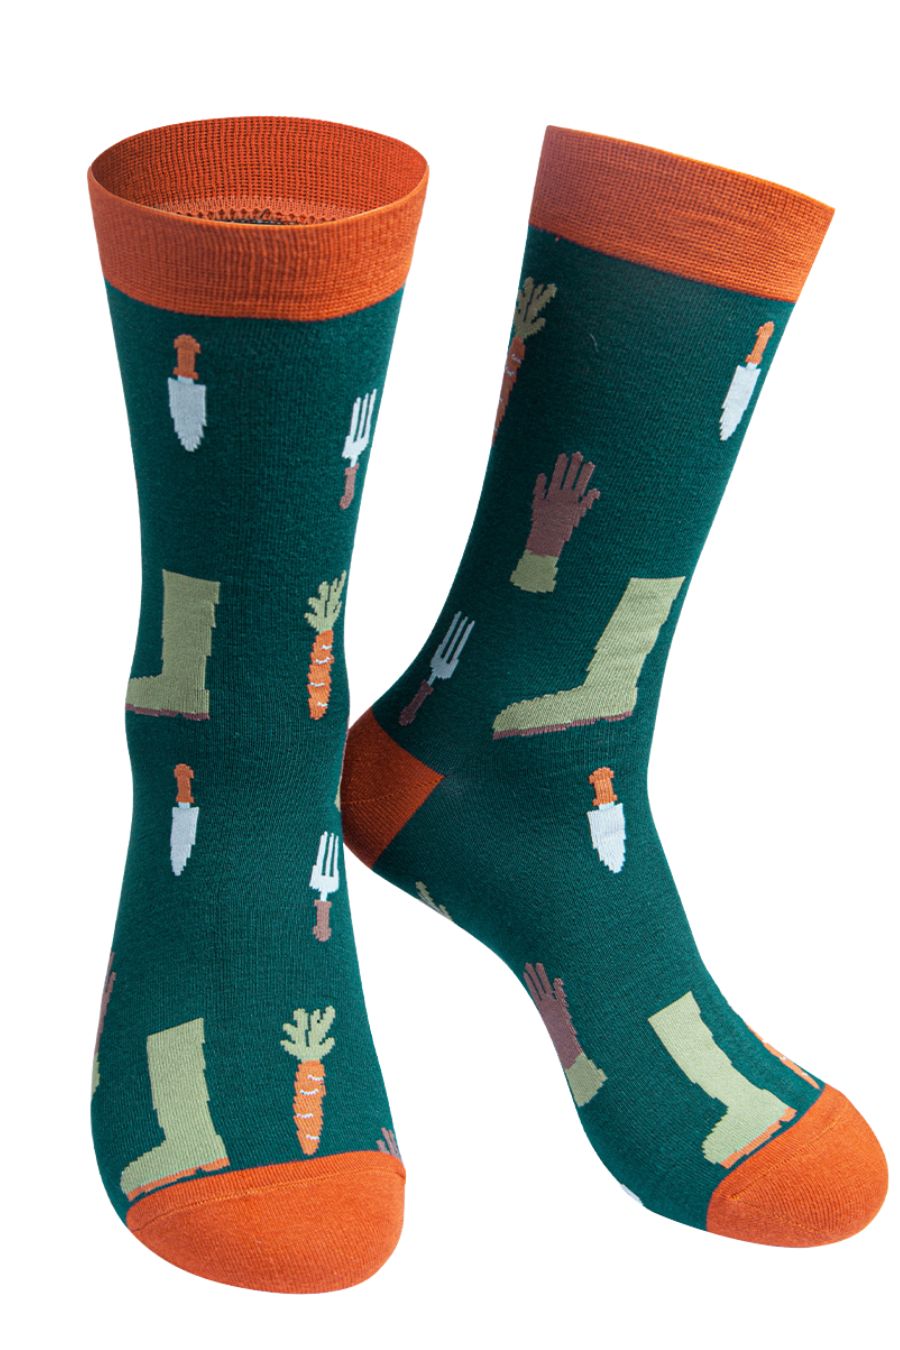 green dress socks with a pattern of garden tools, garden gloves and boots